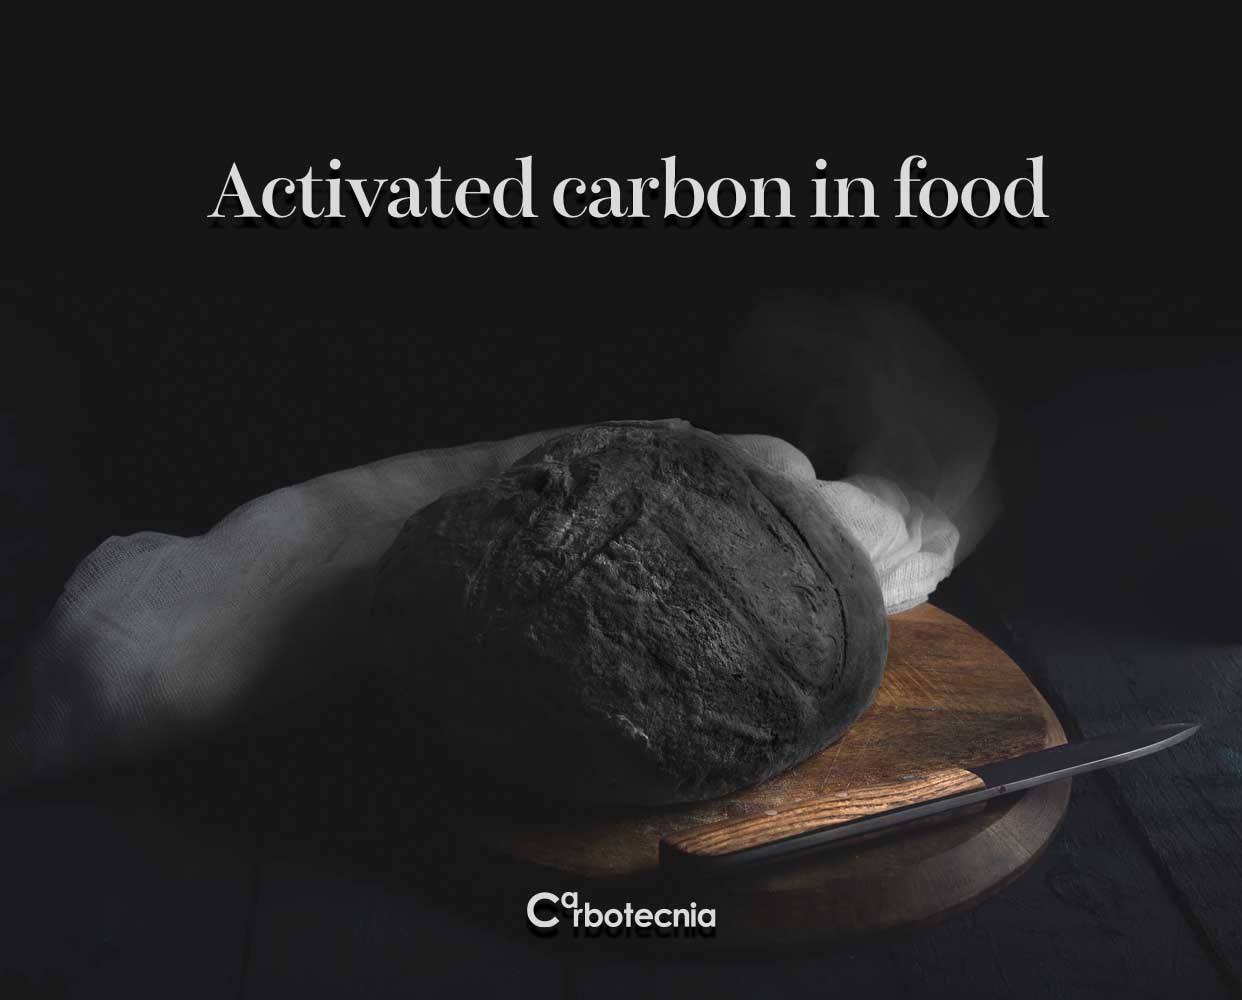 Activated carbon in food